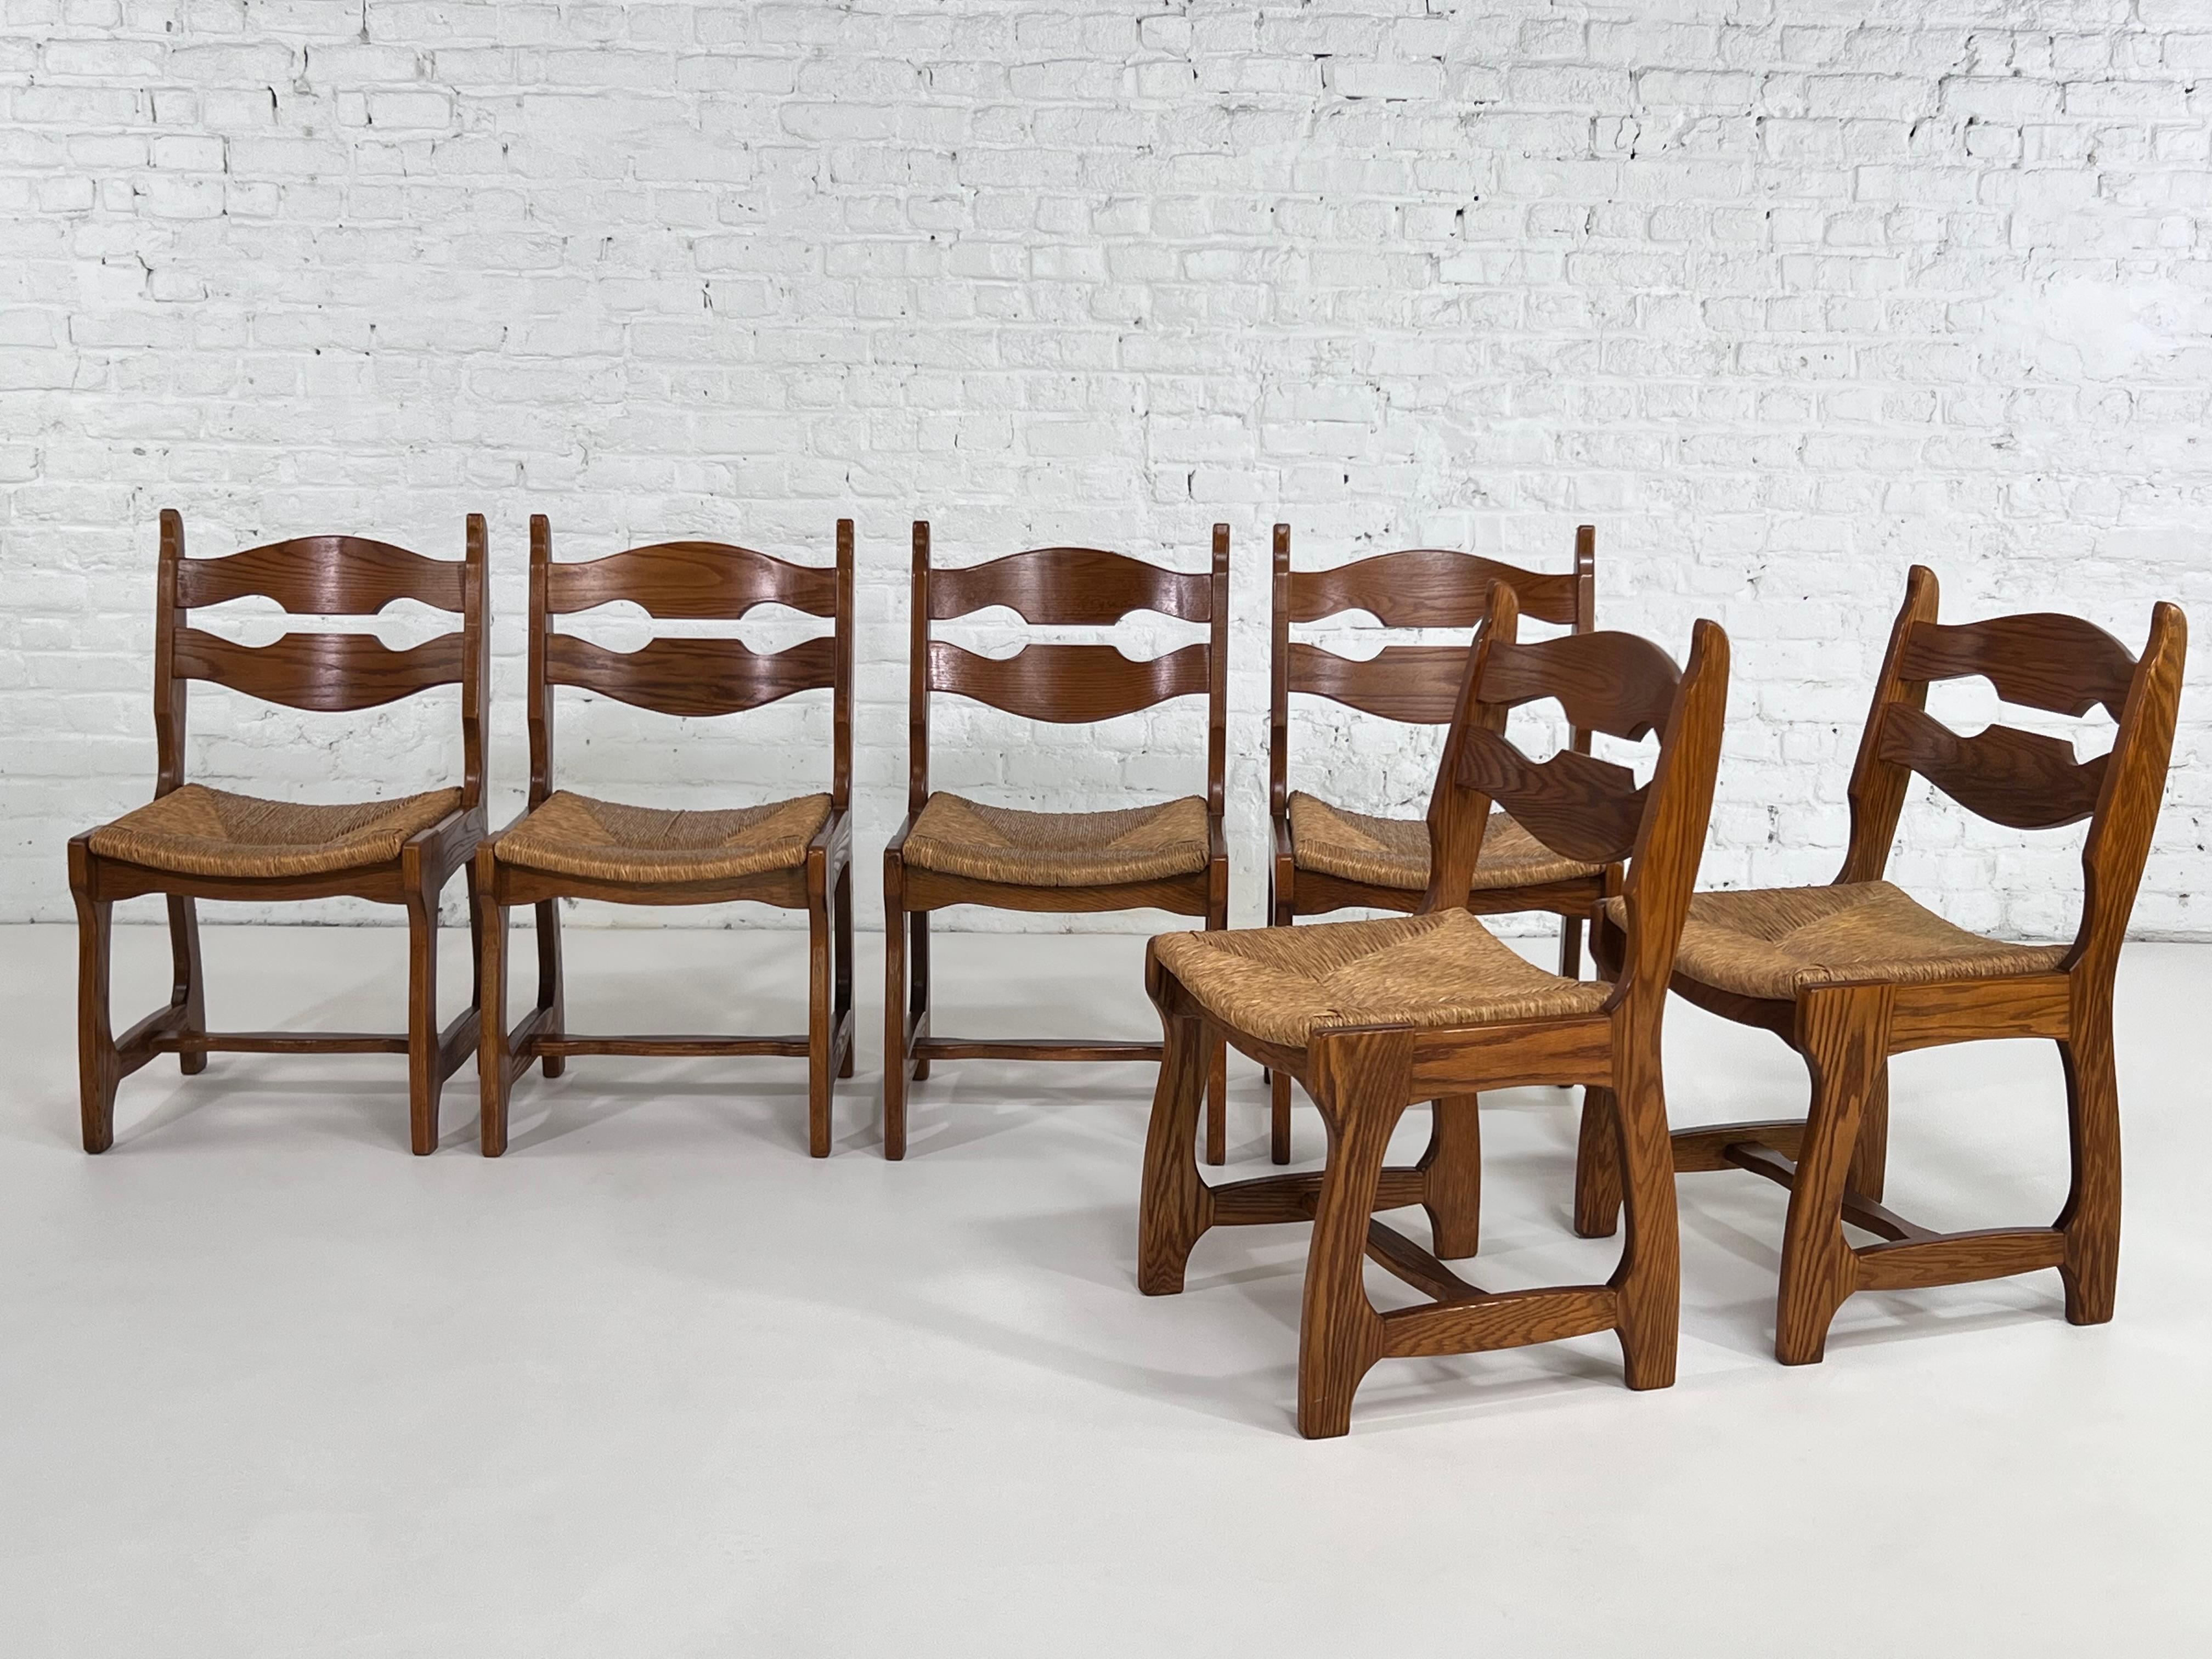 1950s Design Oak Wooden and Braided Straw Seats Set of 6 Chairs For Sale 5